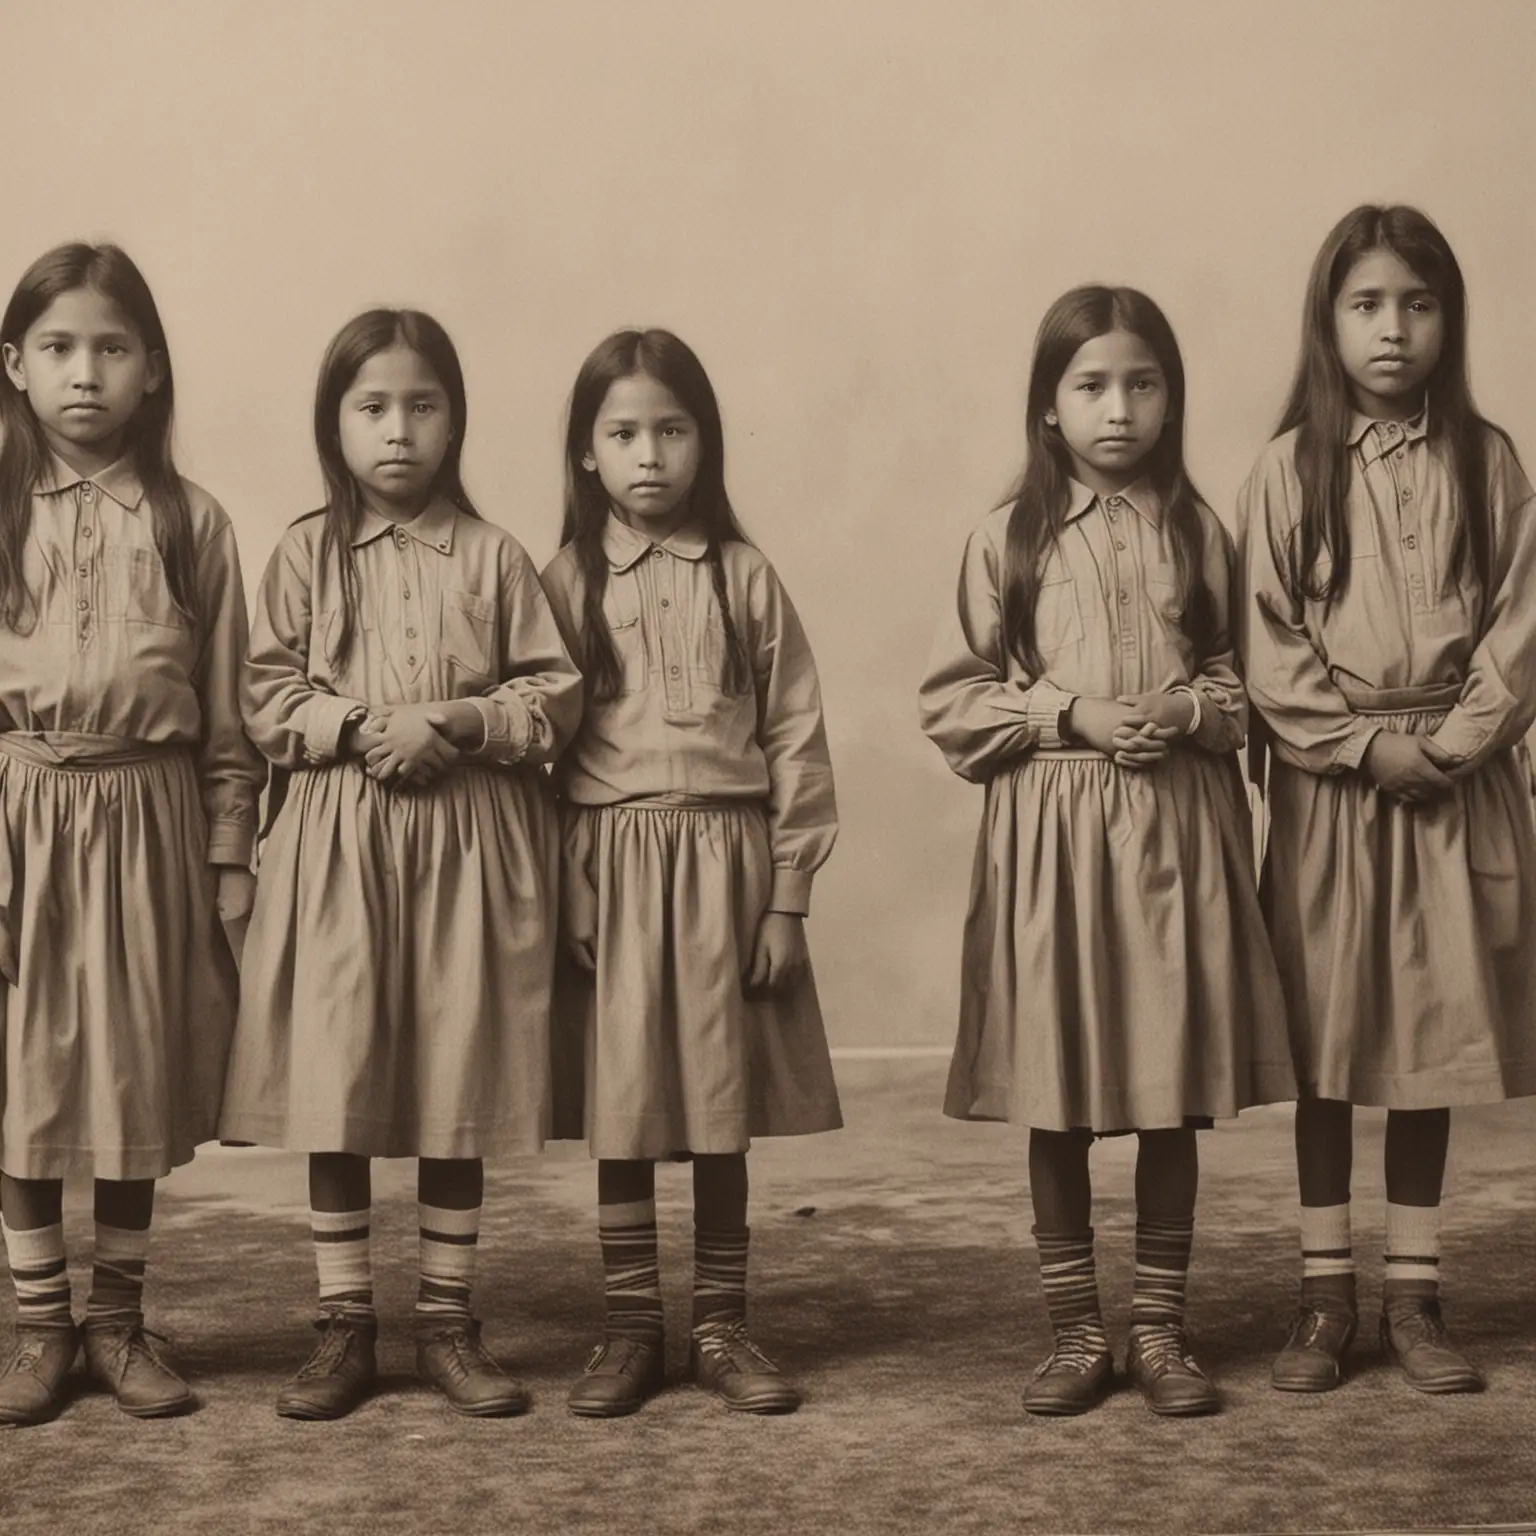 Art exhibition for indigenous children who lost their lives in the residential school system in North America. 